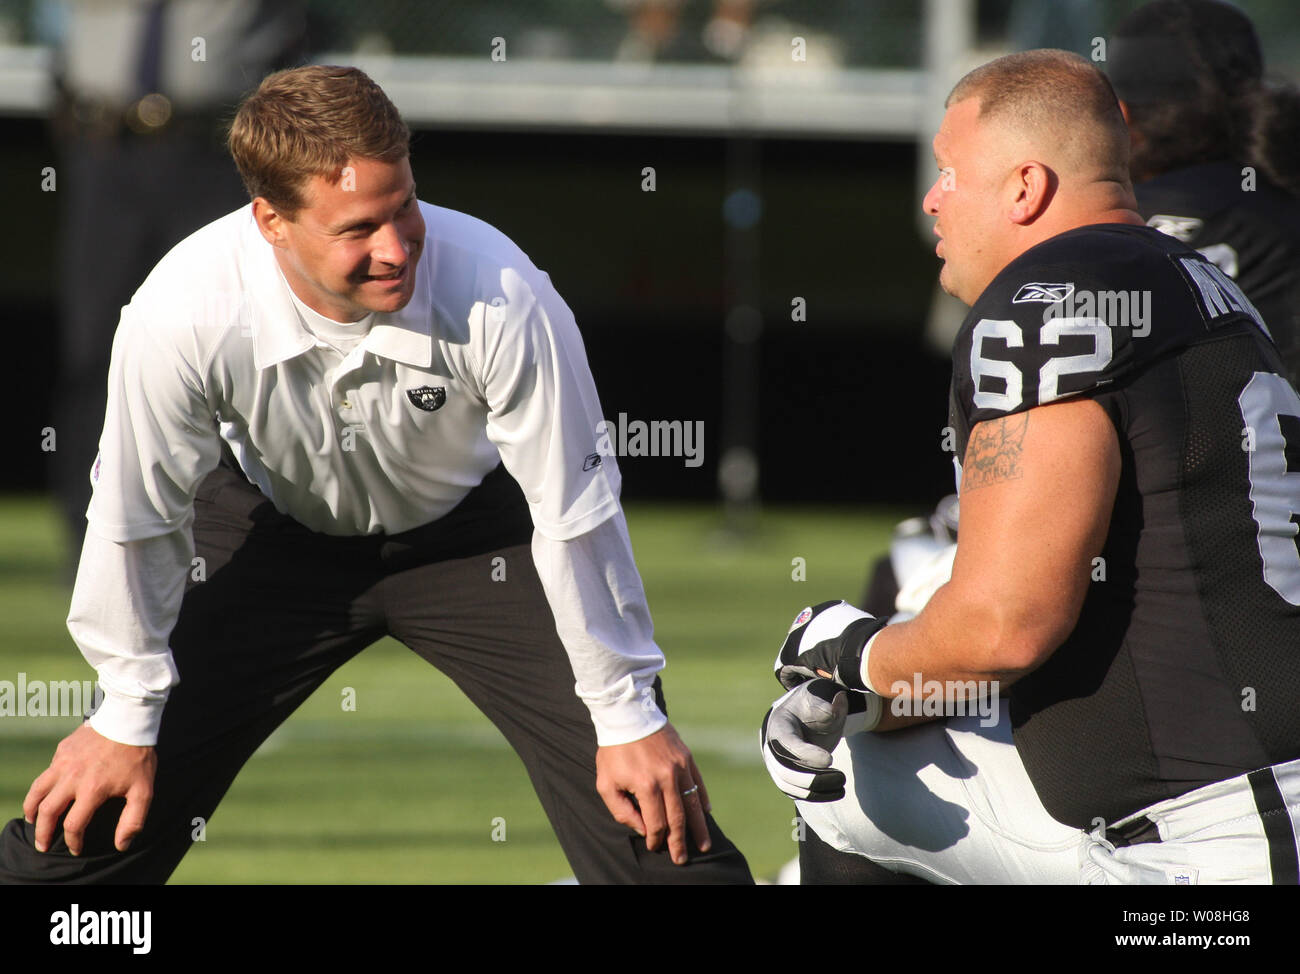 Oakland Raiders Head Coach Lane Kiffin (L) chats with center Jeremy Newberry (62)  as they warm up to play the St. Louis Rams at McAfee Coliseum in Oakland, California on August 24, 2007.    (UPI Photo/Terry Schmitt) Stock Photo